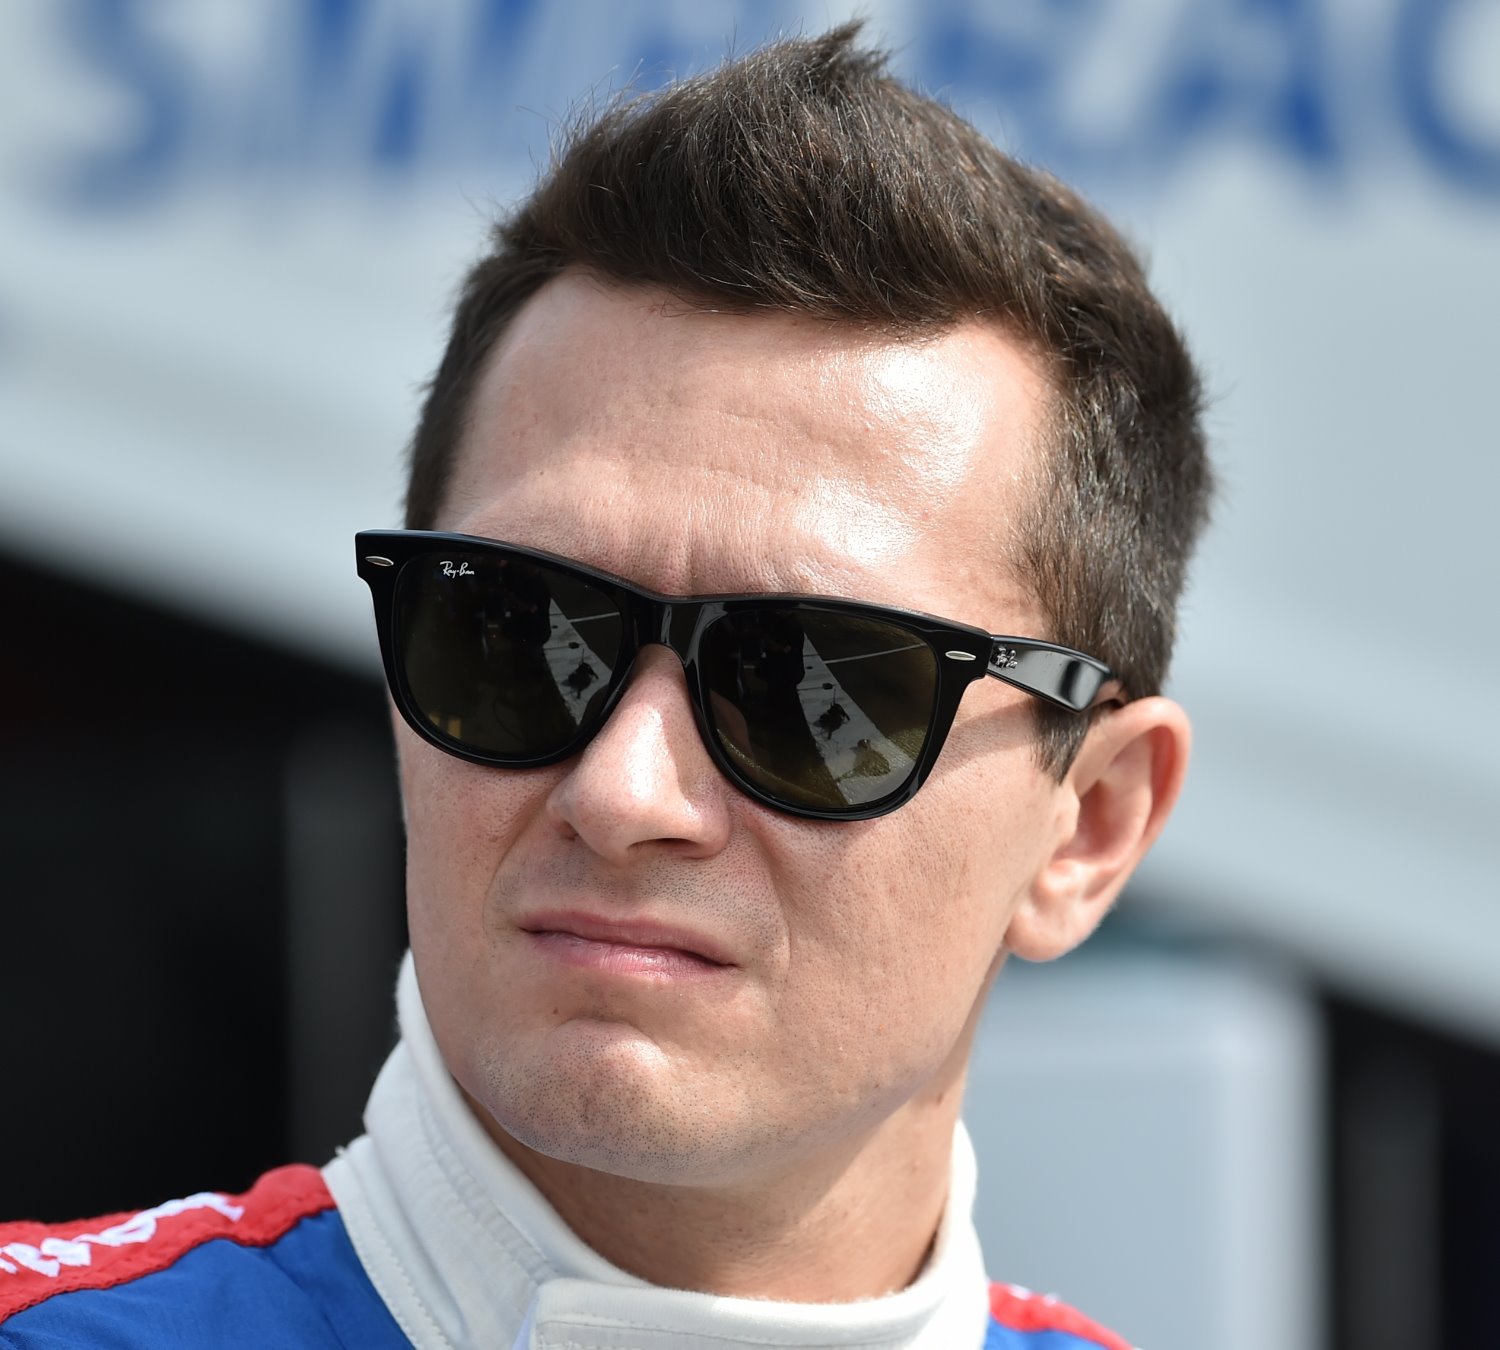 Mikhail Aleshin will look to build on his 5th place finish at St. Pete